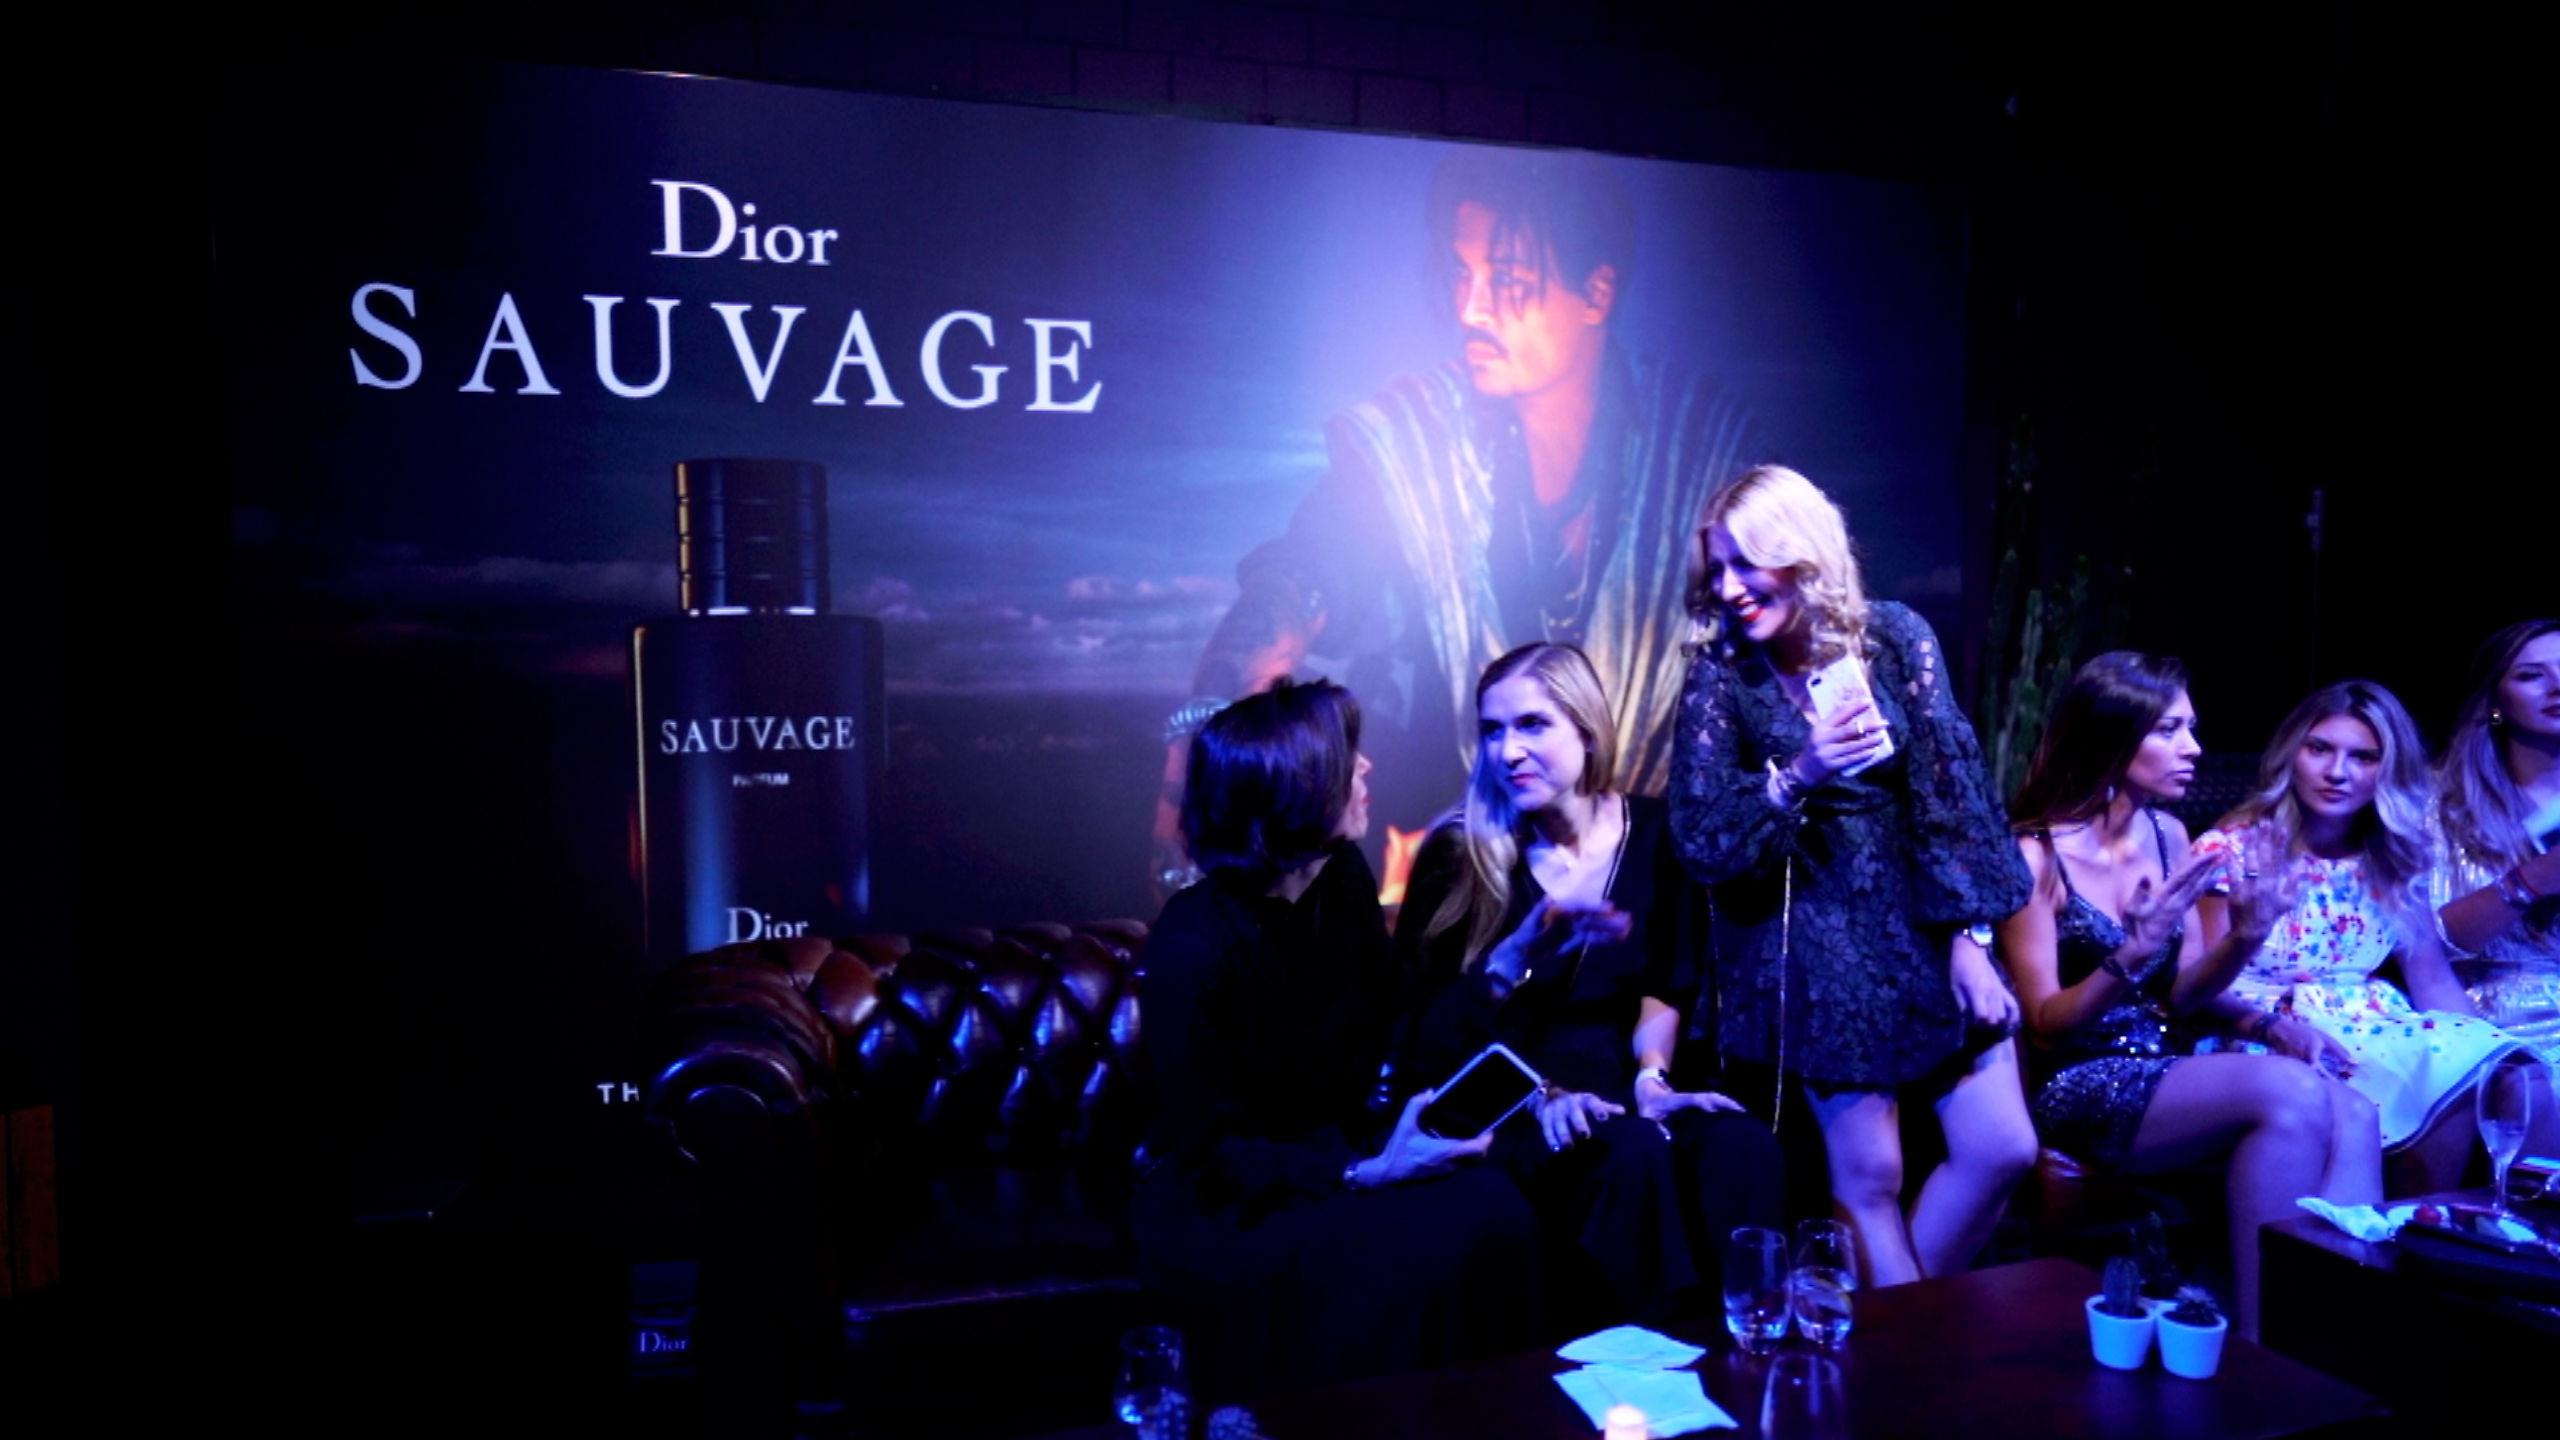 Launch of the parfum DIOR SAUVAGE